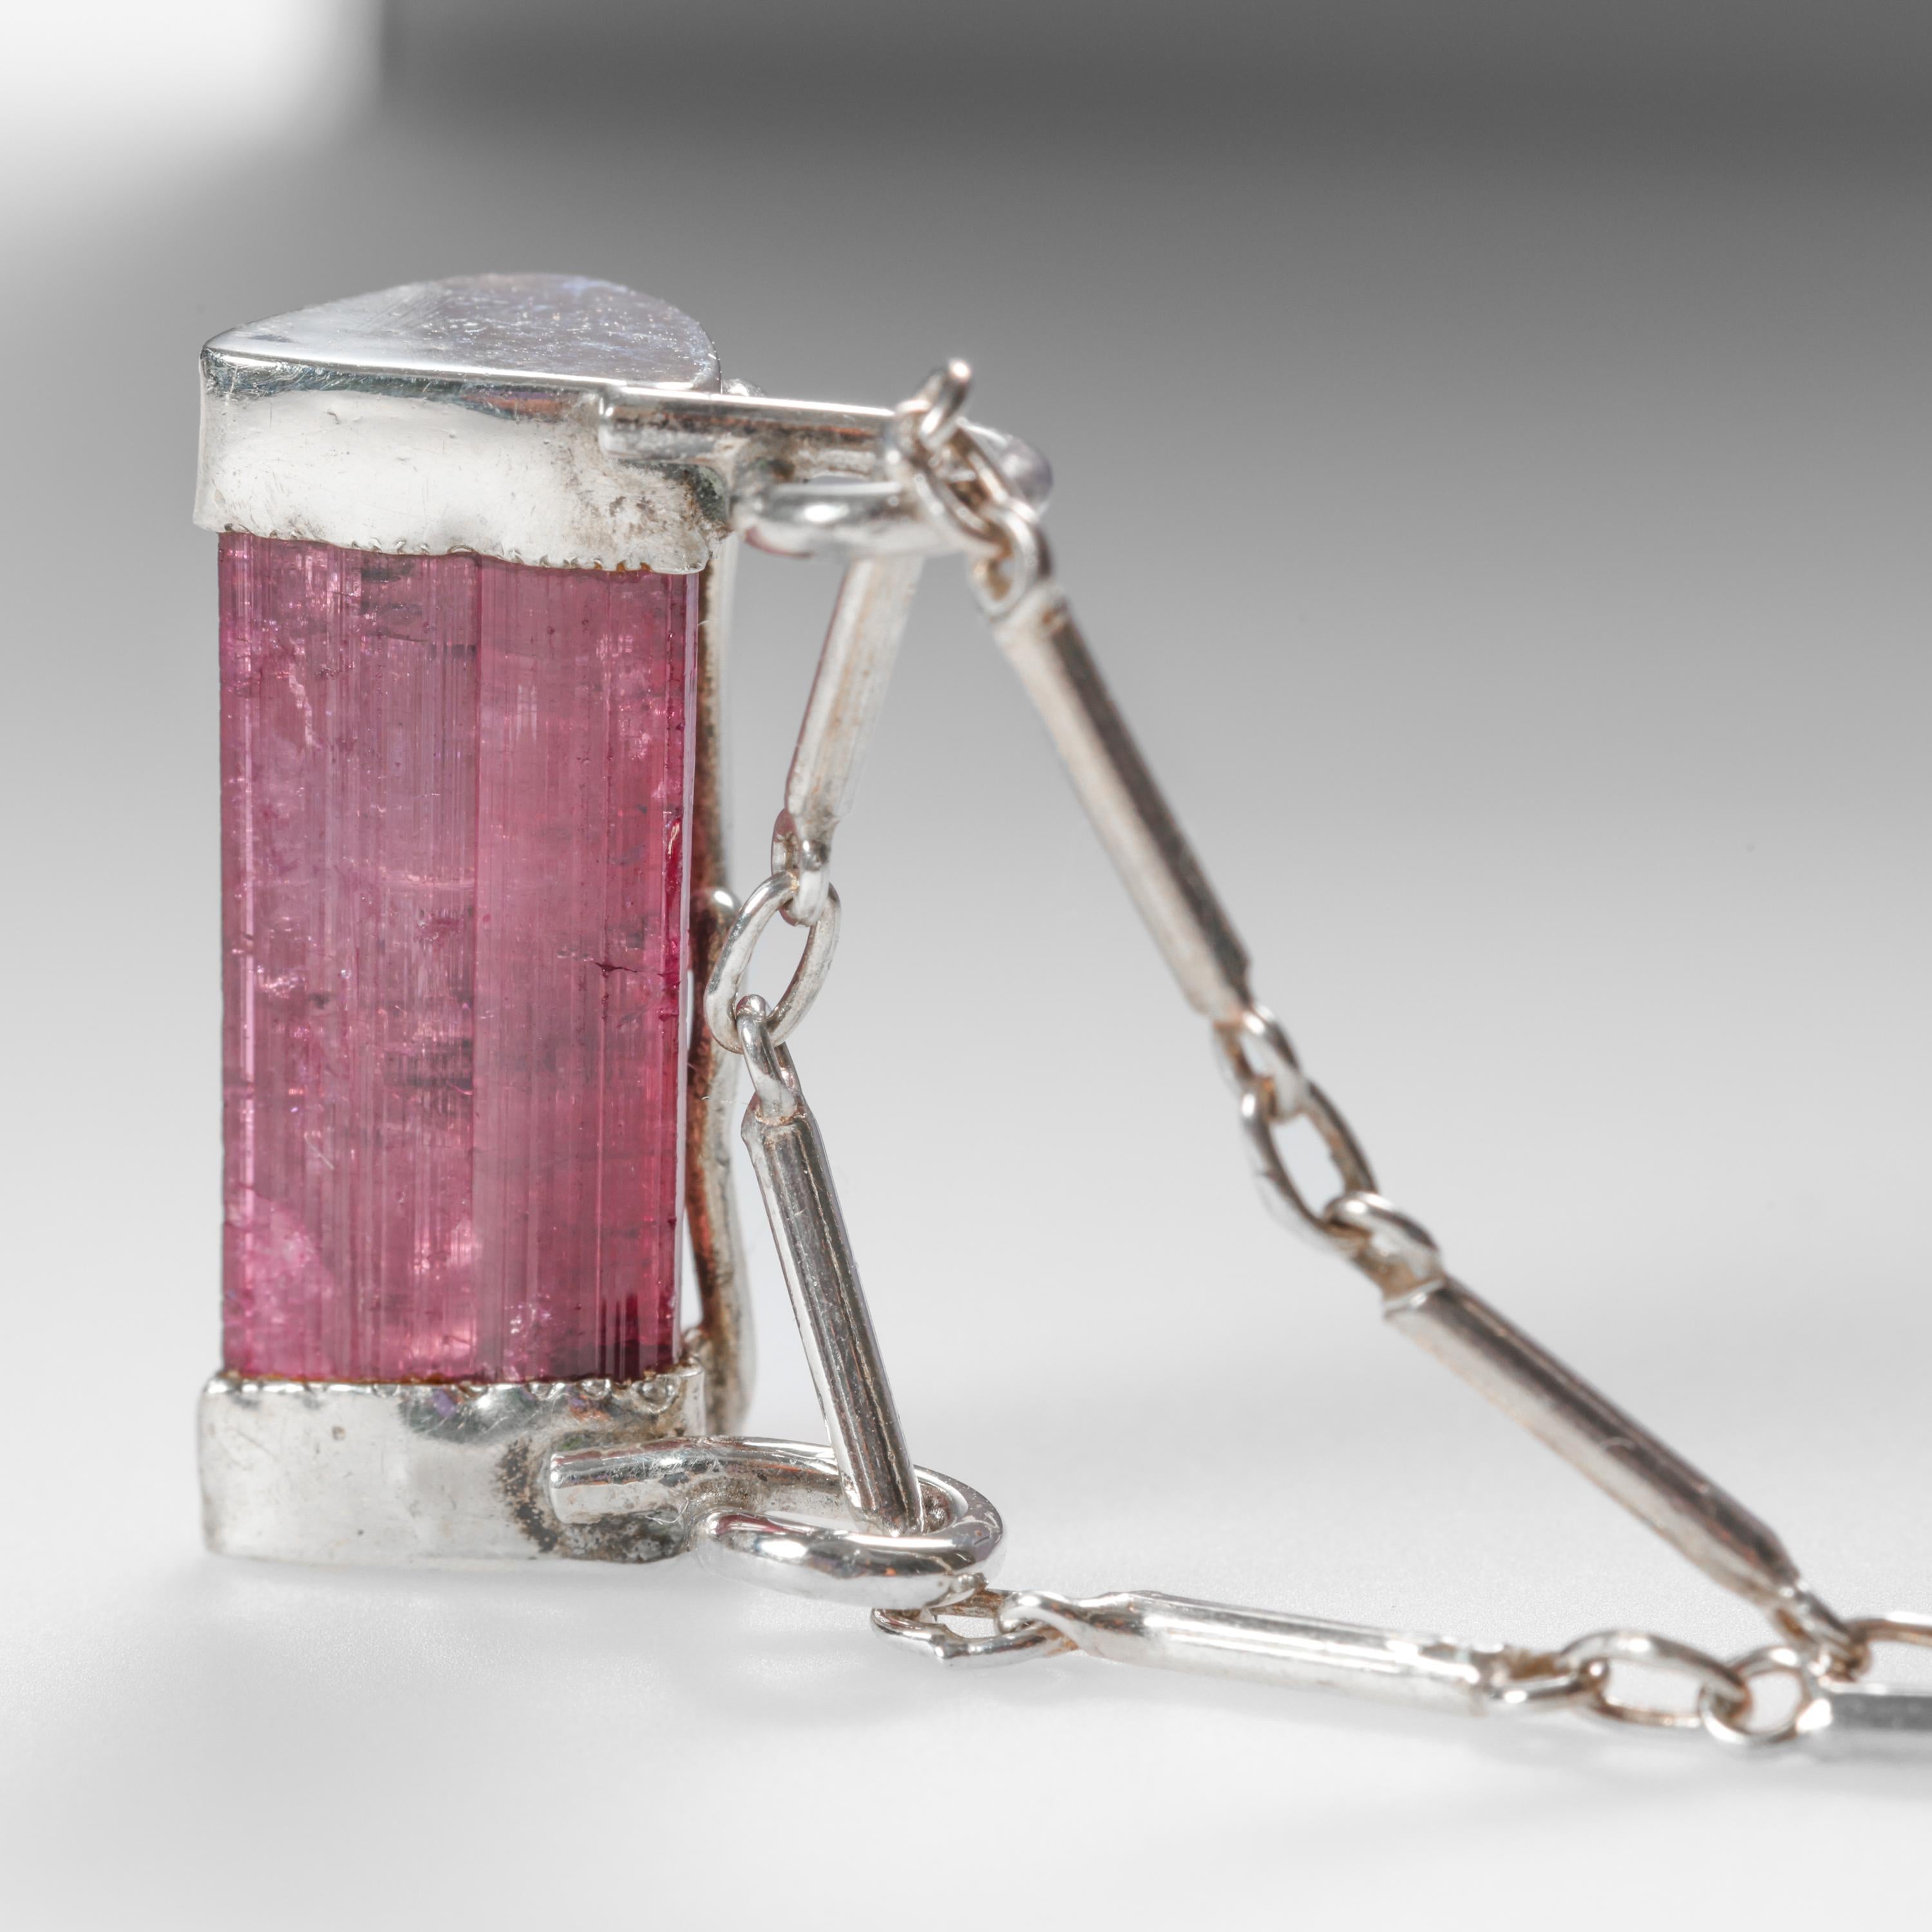 This circa 1960s silver choker pendant necklace features a natural, raw raspberry tourmaline crystal set into a custom-fabricated silver mounting. The silver-enclosed tourmaline pendant measures 22.63mm x 8.48mm not including the double loops at